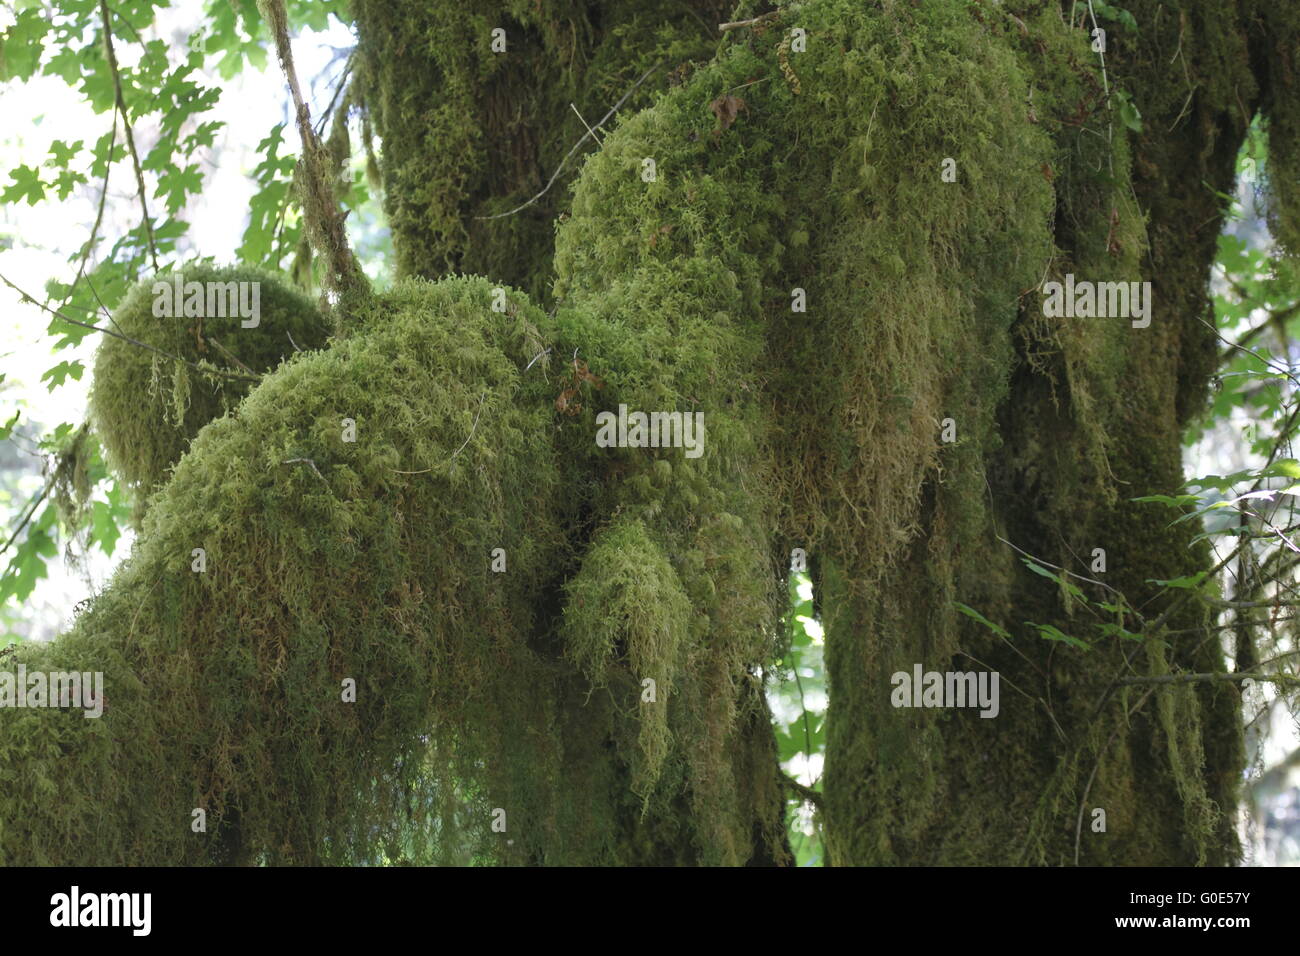 Moss covered branches Stock Photo